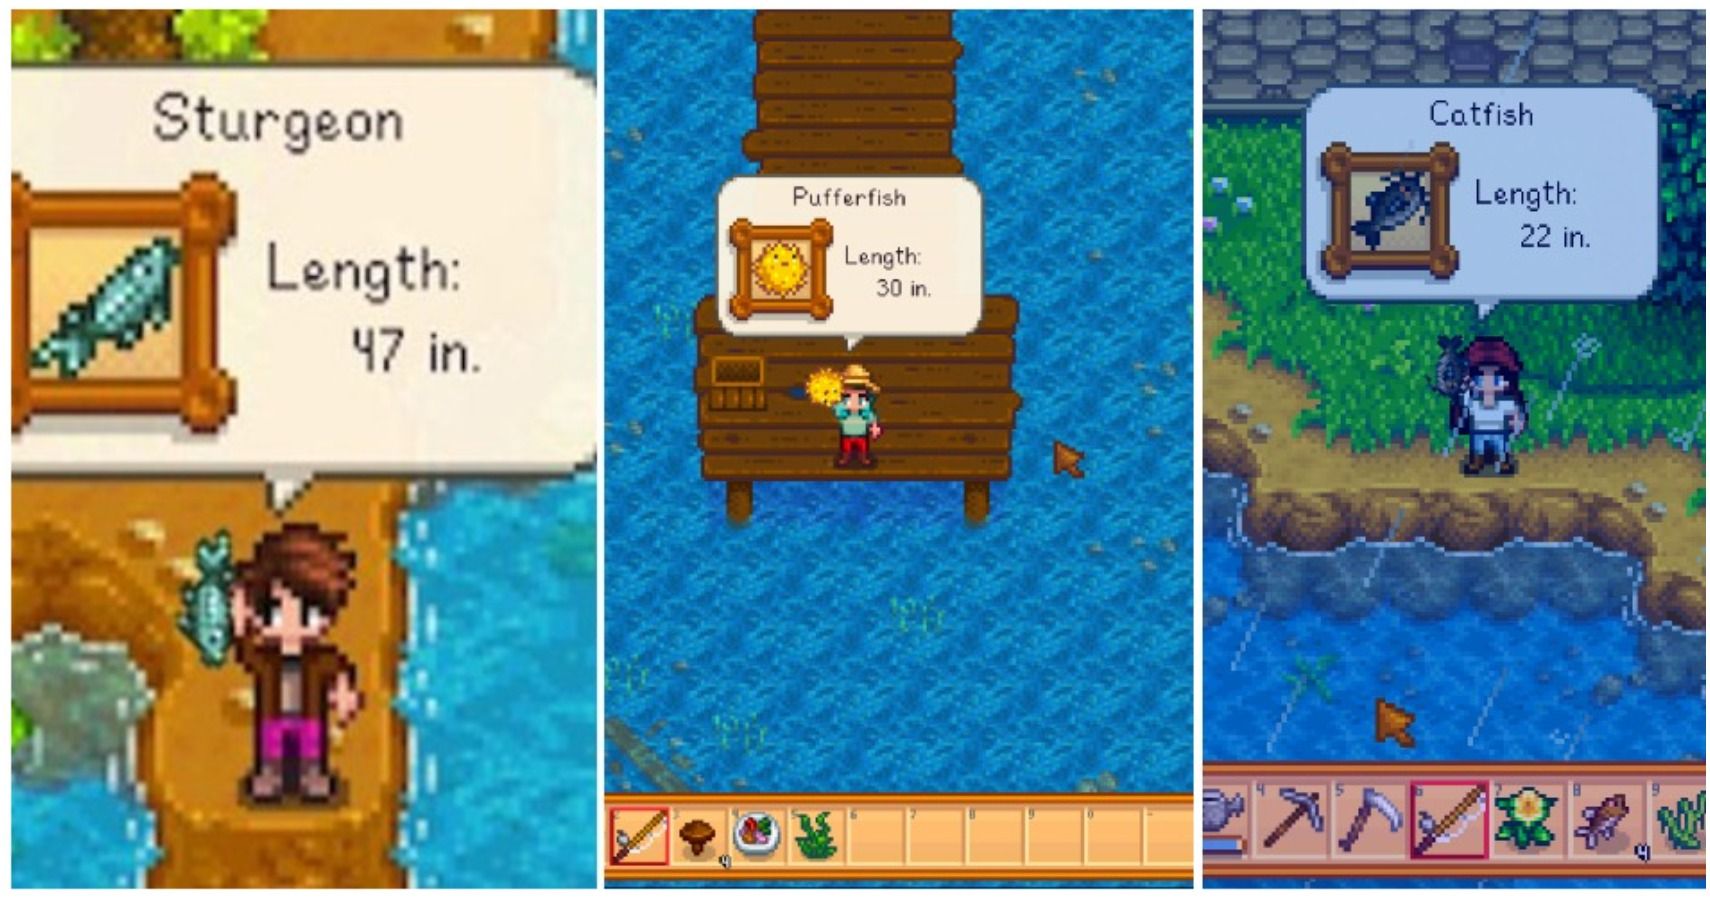 The Most Expensive Fish In Stardew Valley